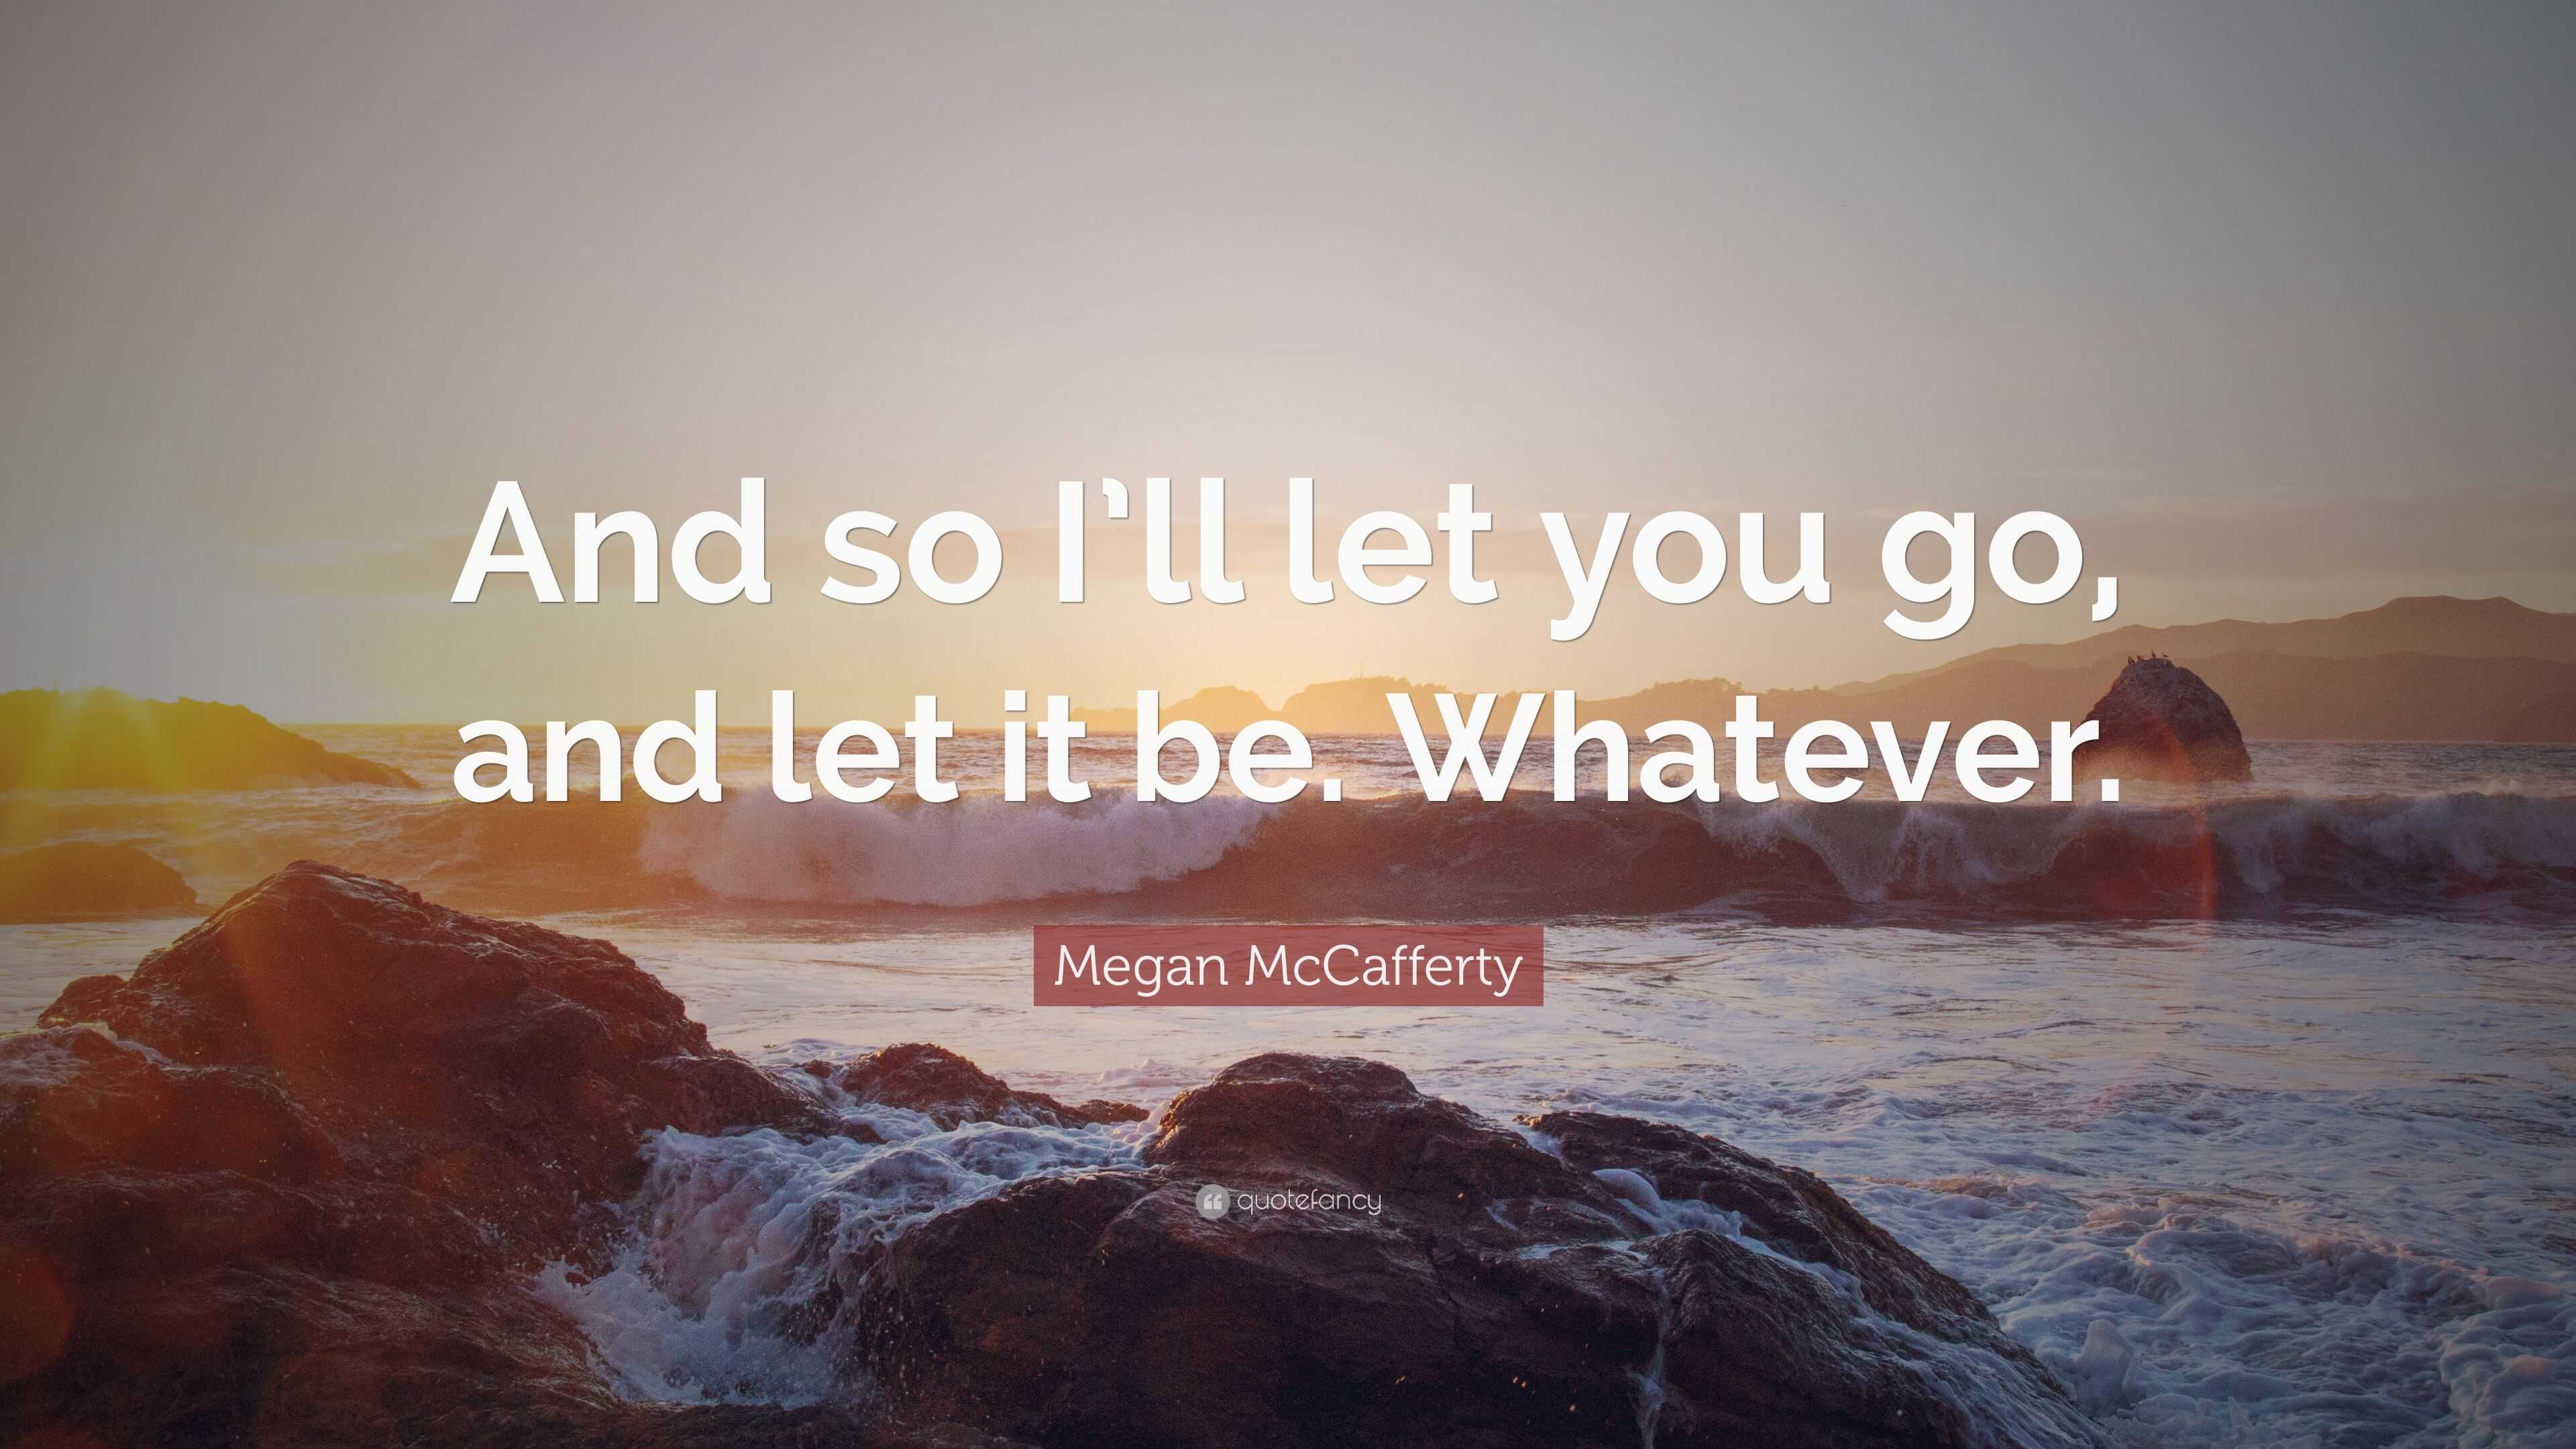 Megan McCafferty Quote: “And so I’ll let you go, and let it be. Whatever.”